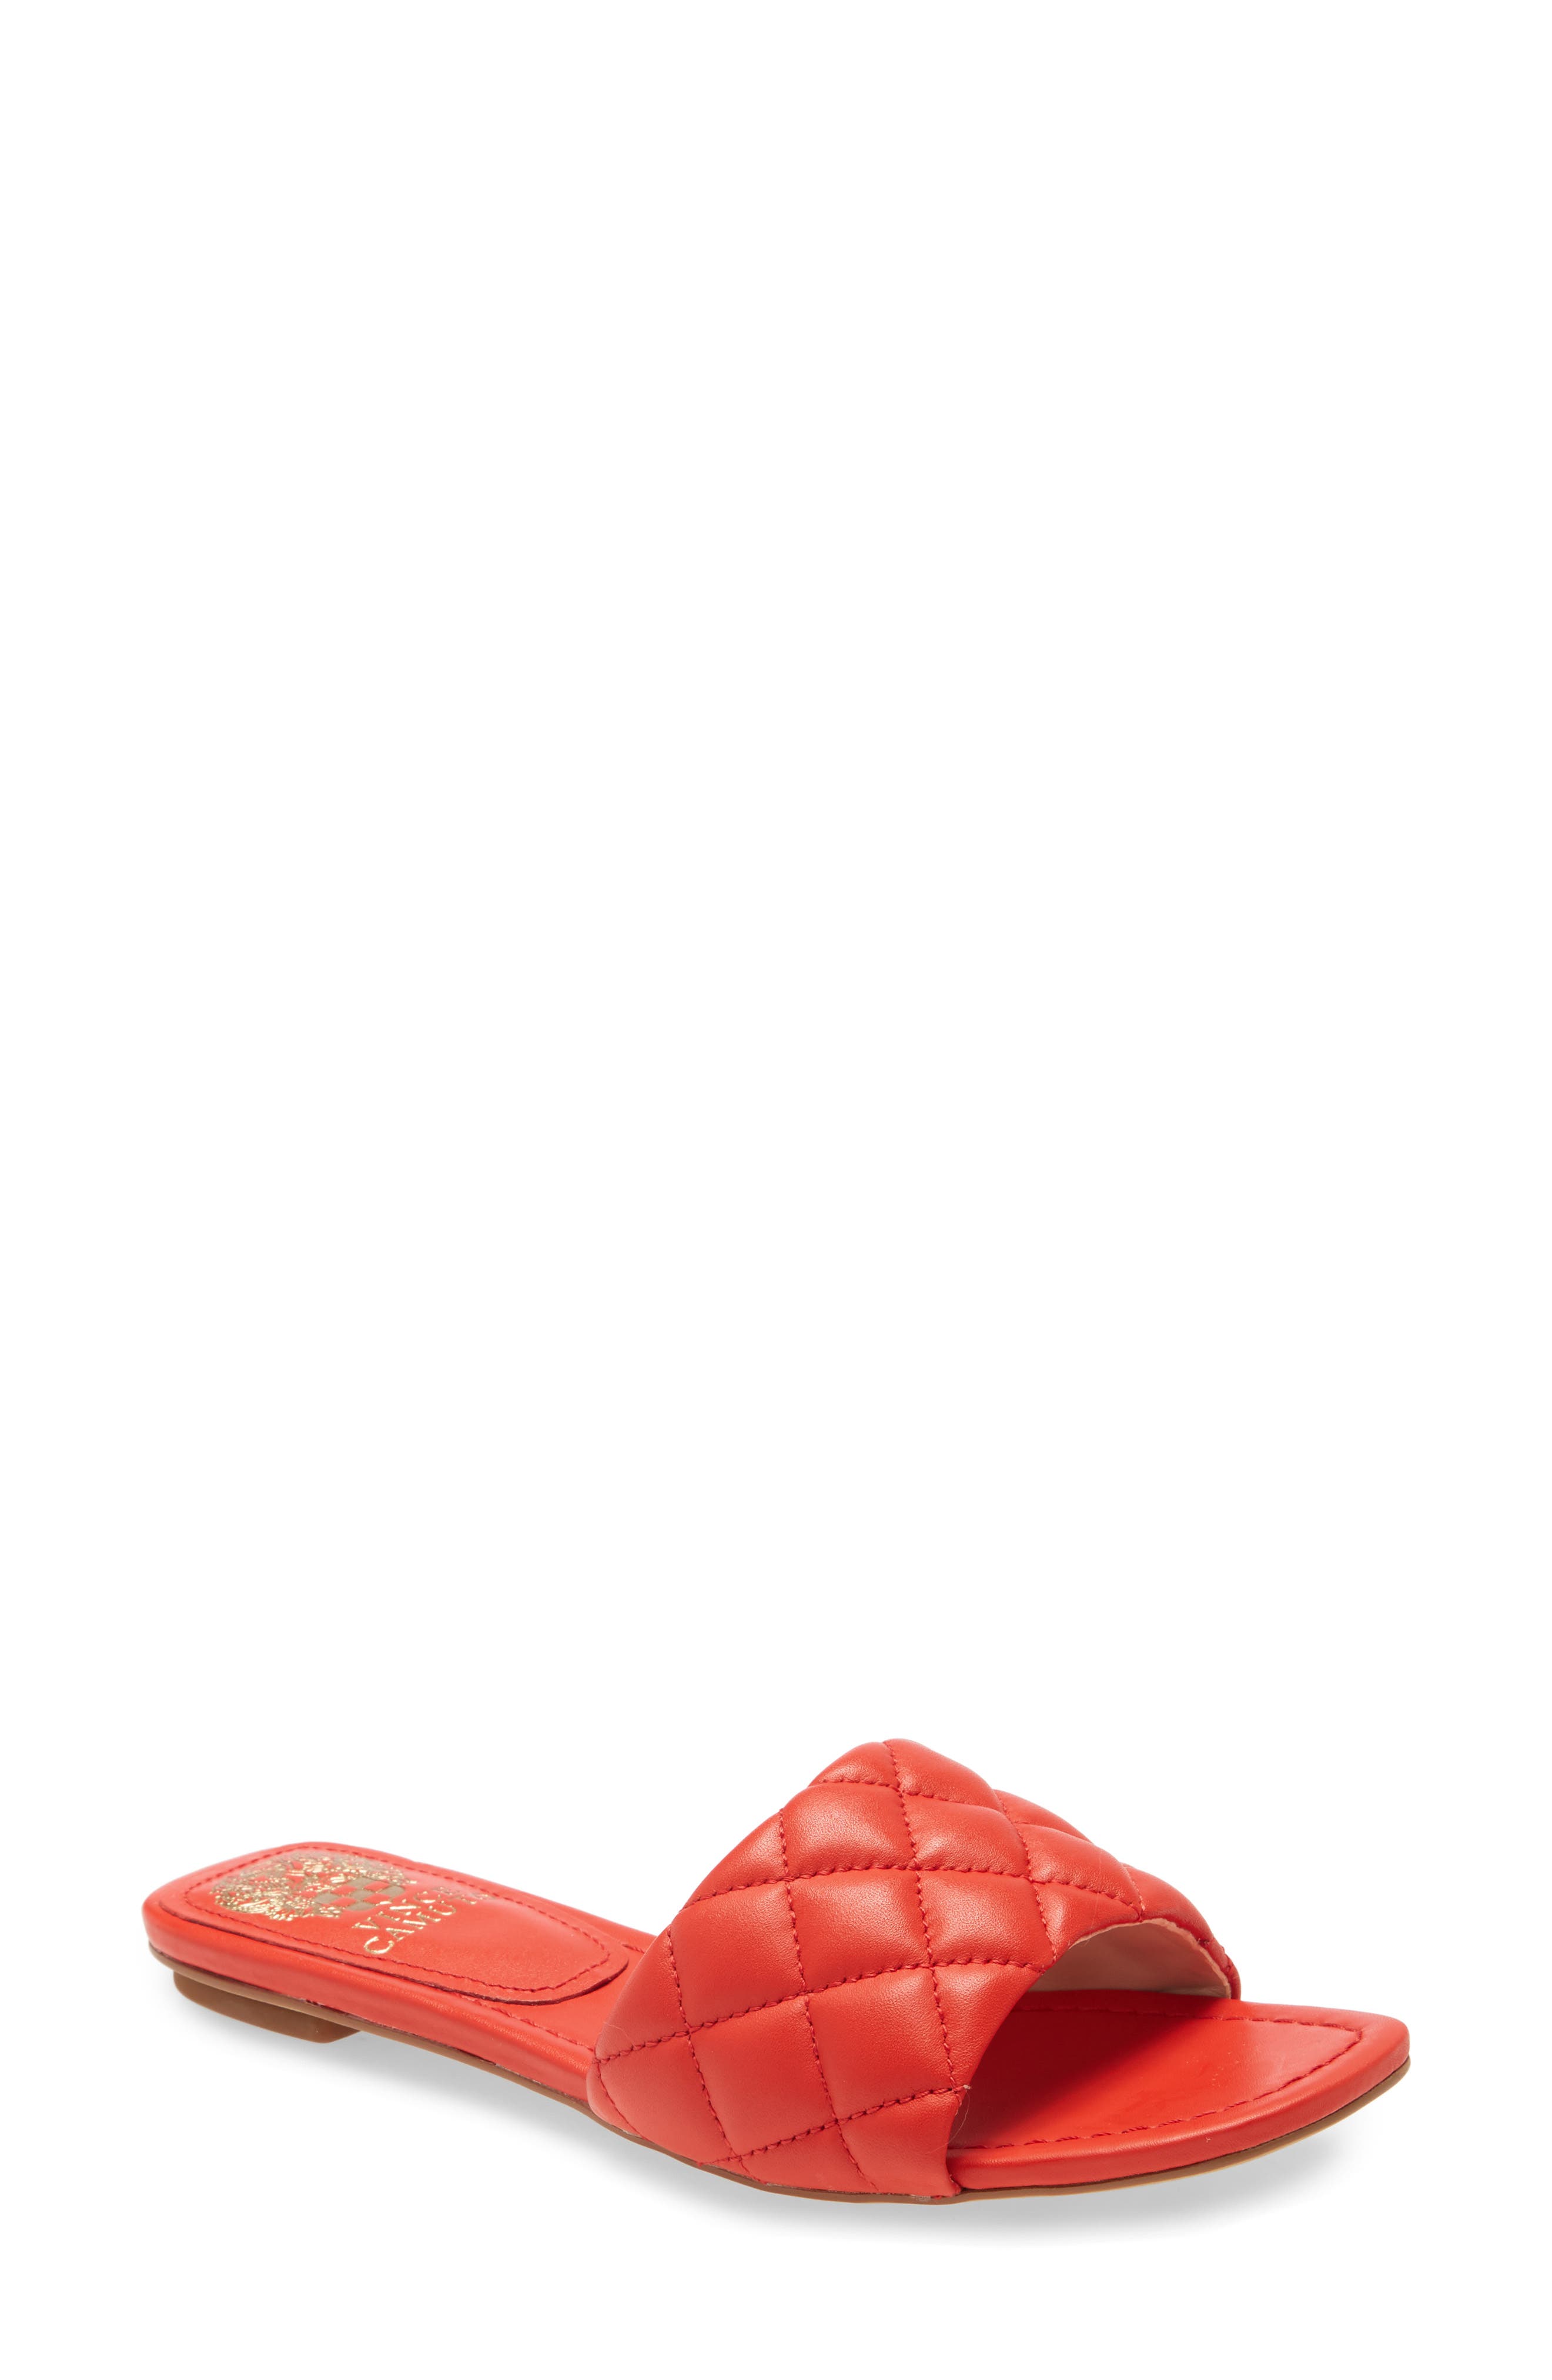 vince camuto red mules